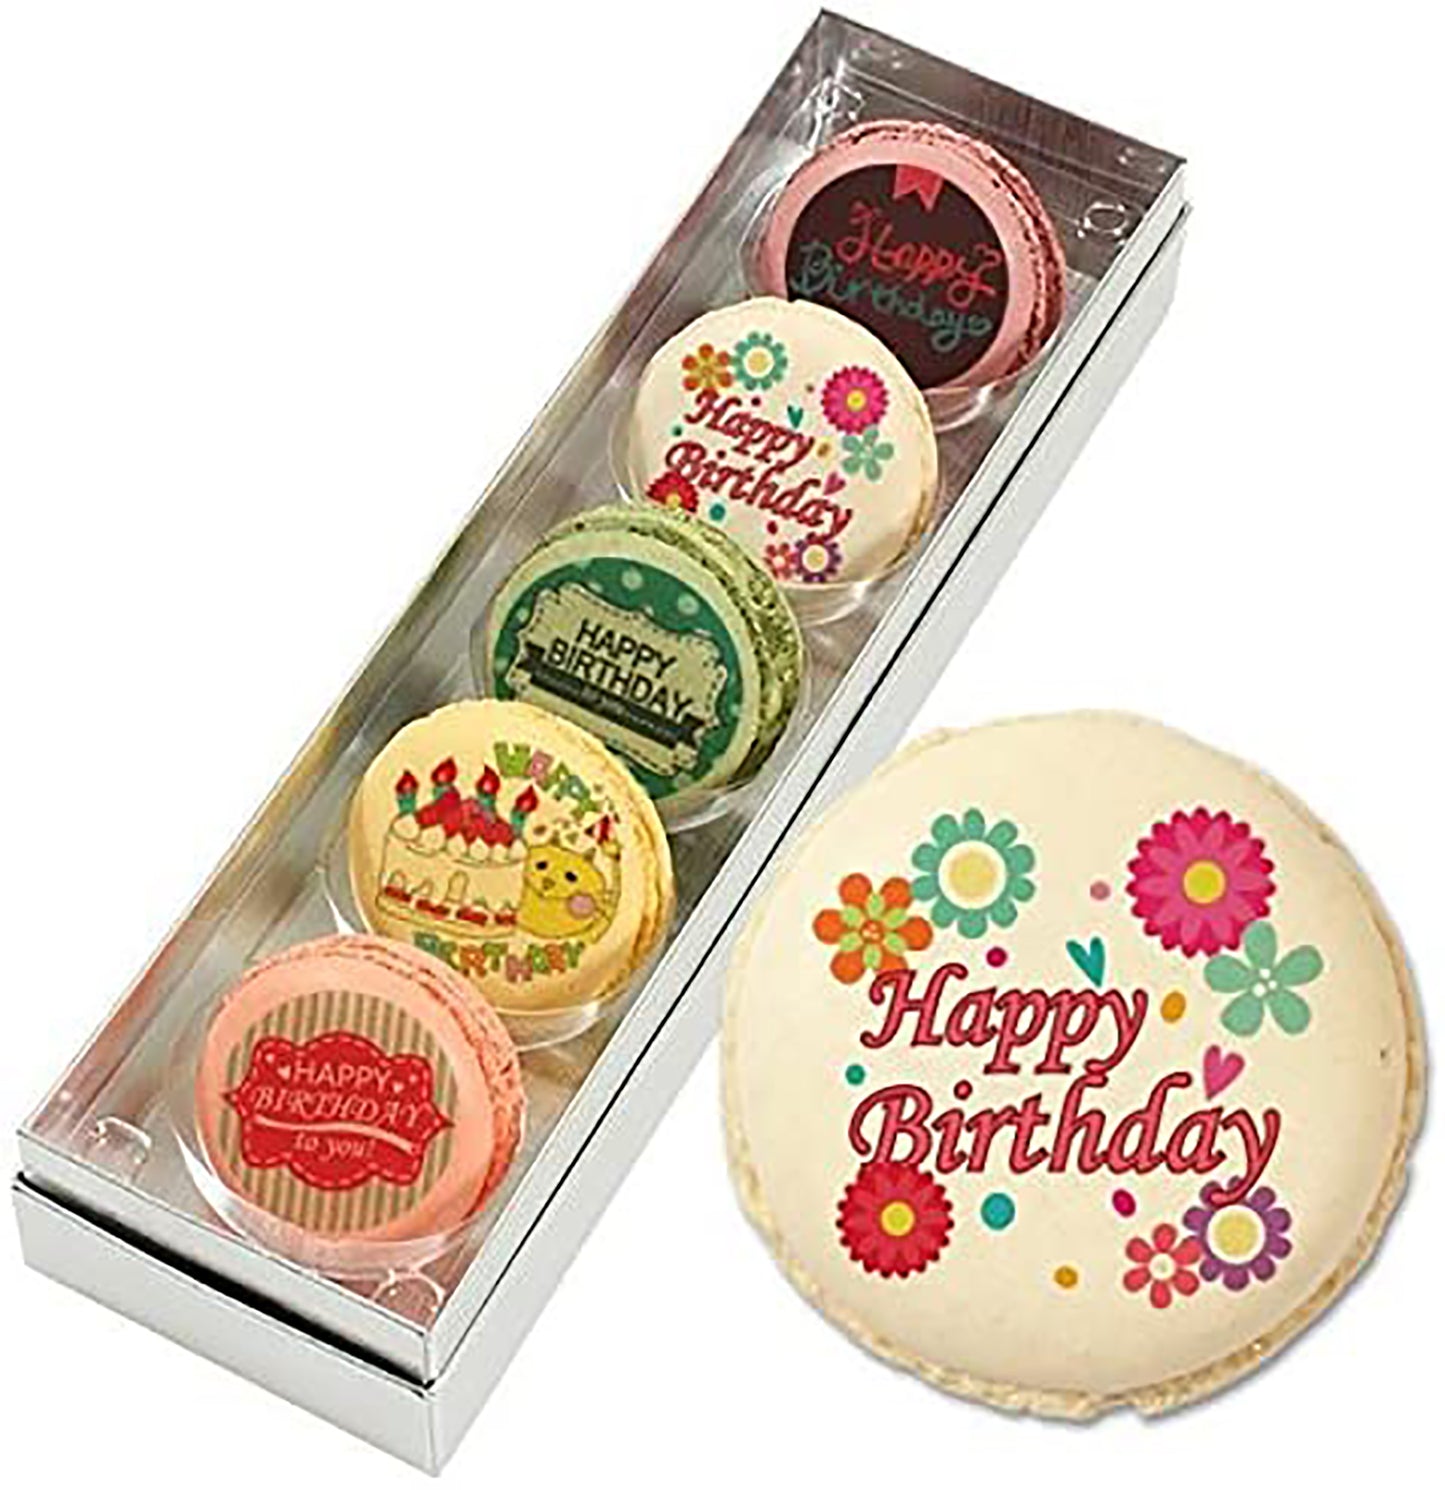 Happy Birthday /assorted macarons 5pcs / flowers, cake and cat...